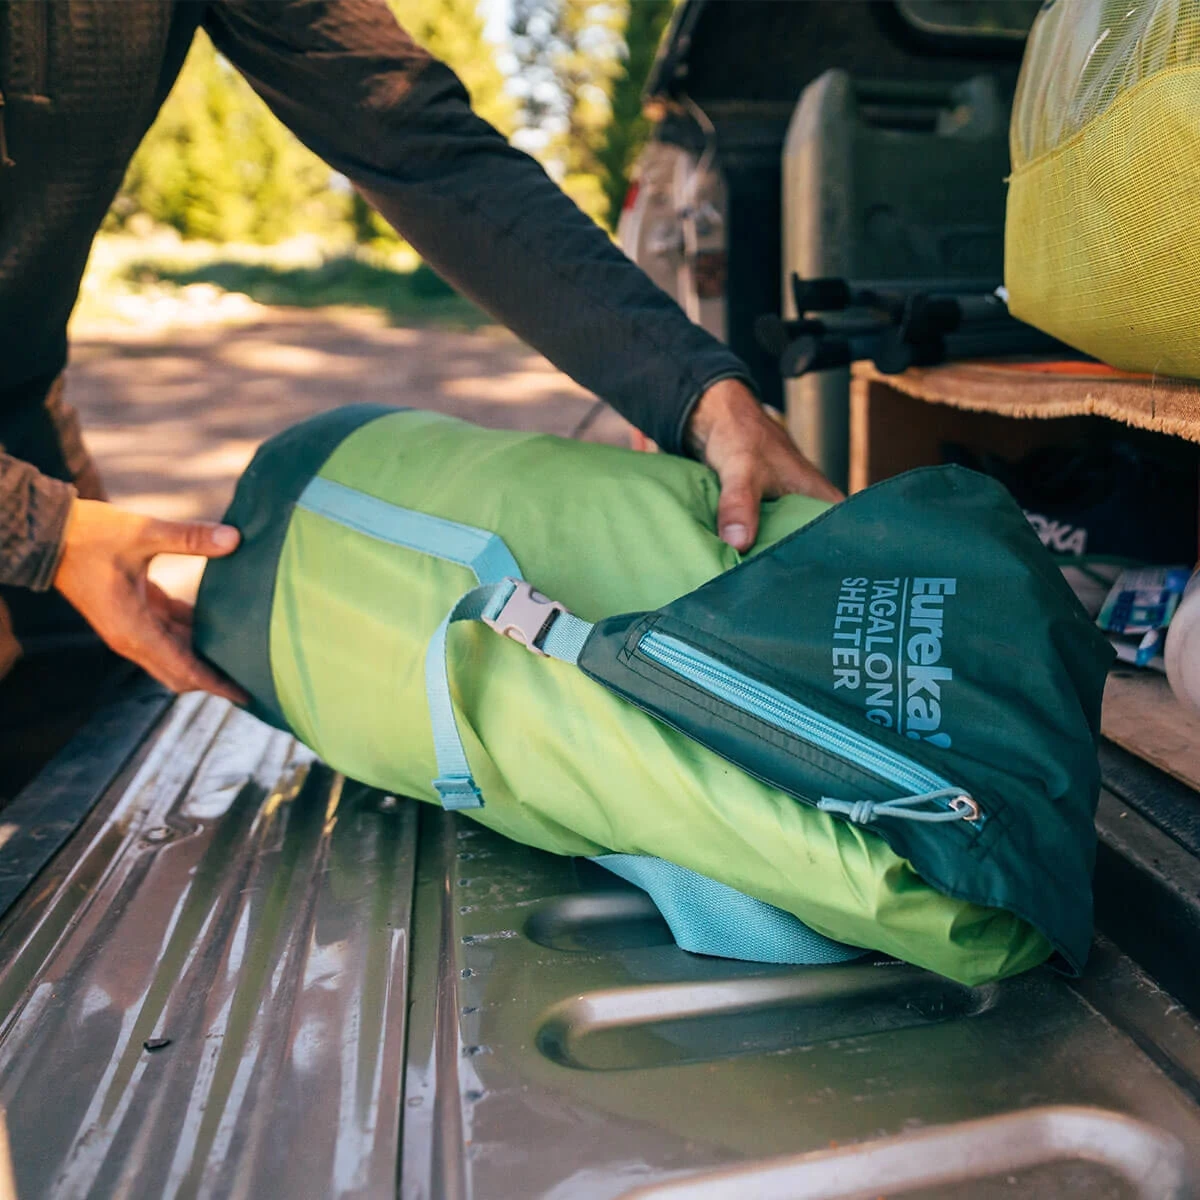 Grabbing the Eureka! Tagalong Shelter from a truck bed